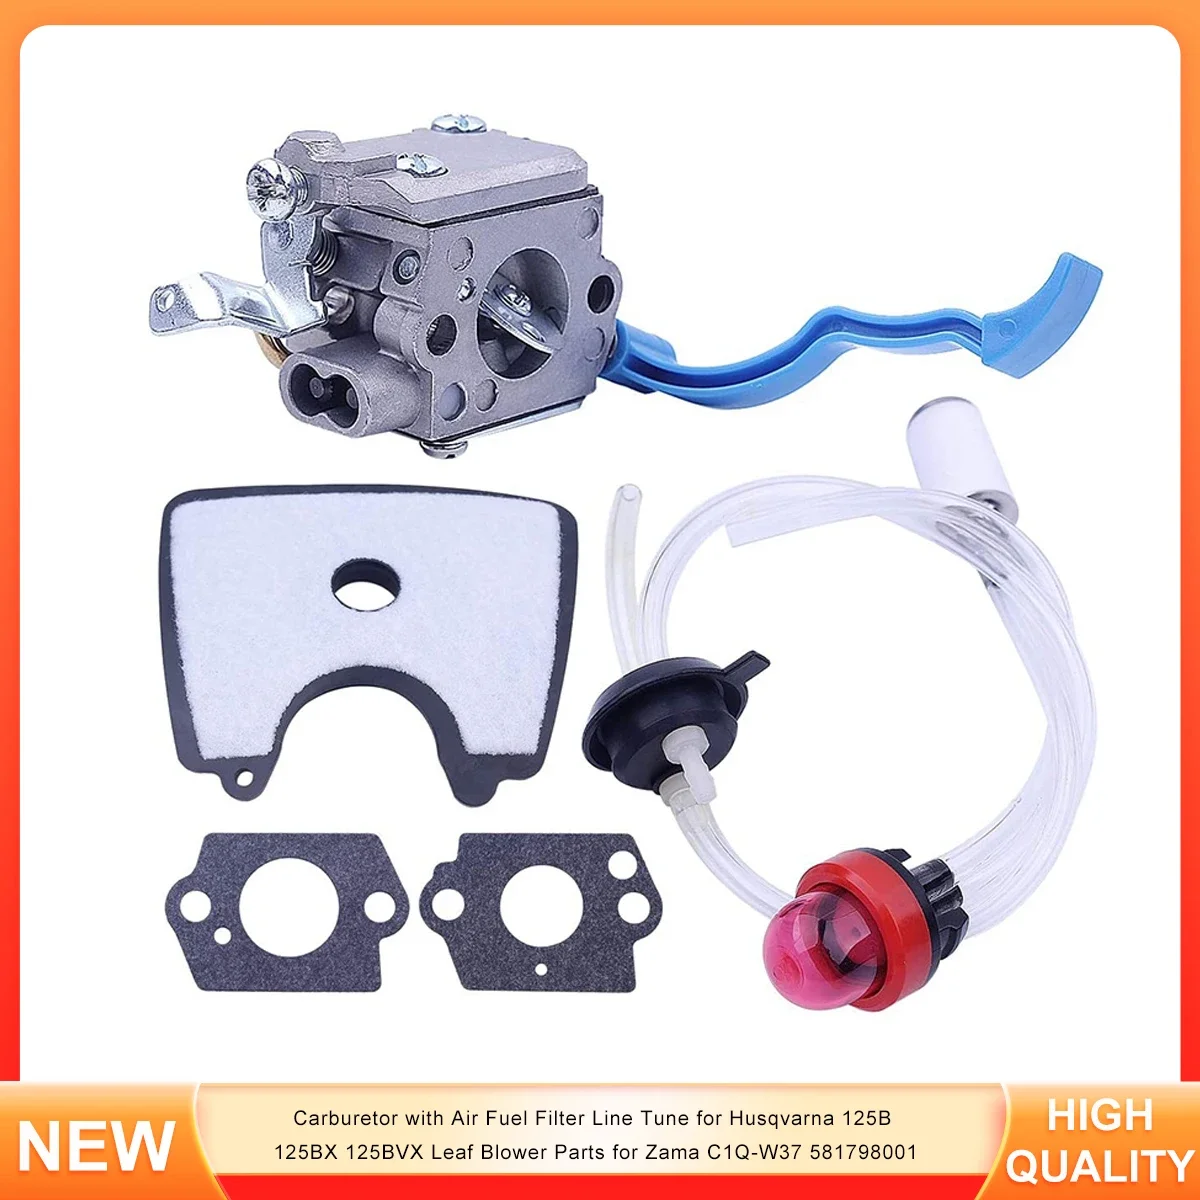 

Carburetor with Air Fuel Filter Line Tune for Husqvarna 125B 125BX 125BVX Leaf Blower Parts for Zama C1Q-W37 581798001